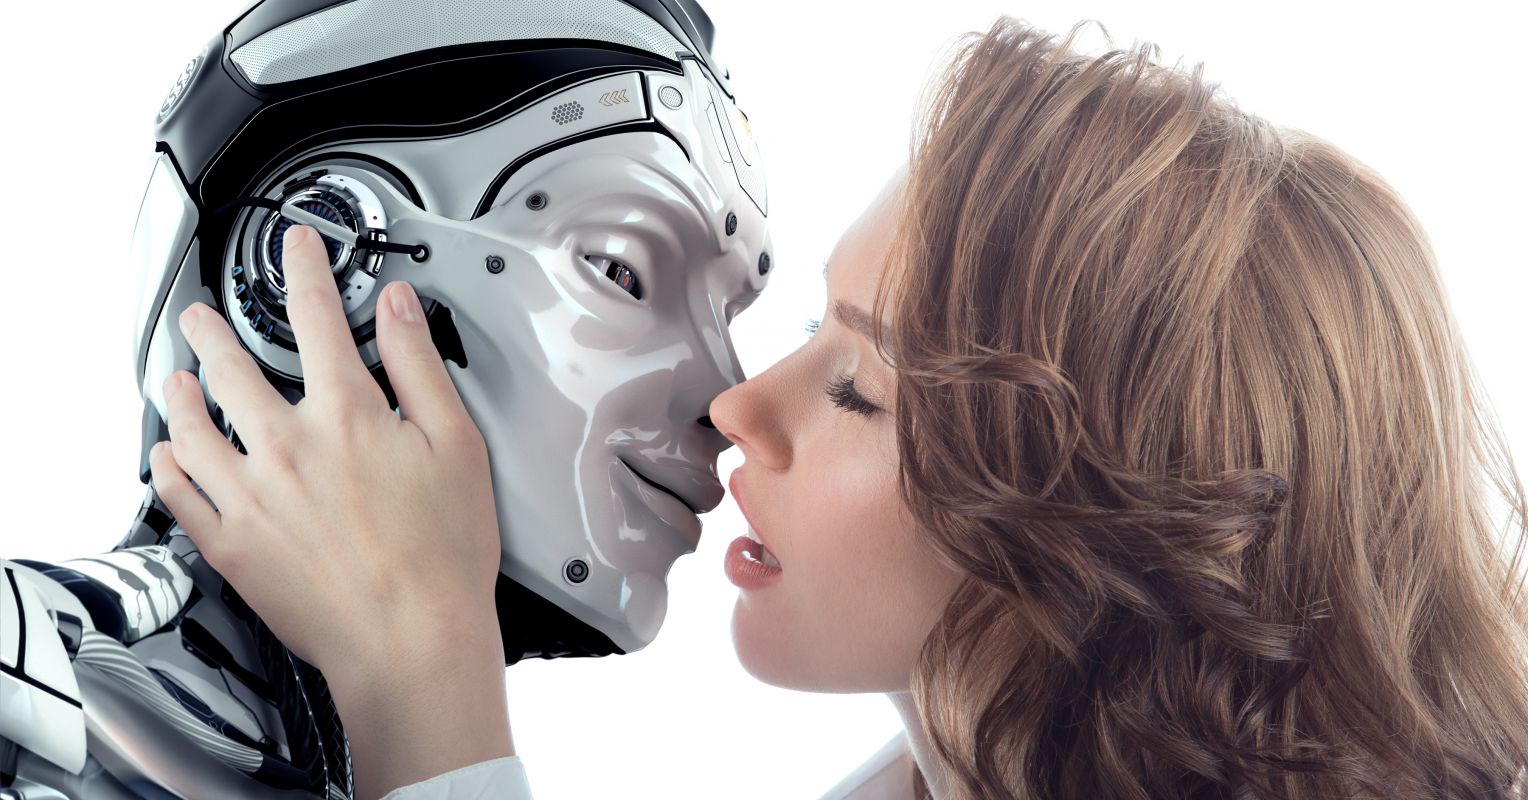 Are We Prepared for the Age of Sex Robots? Psychology Today